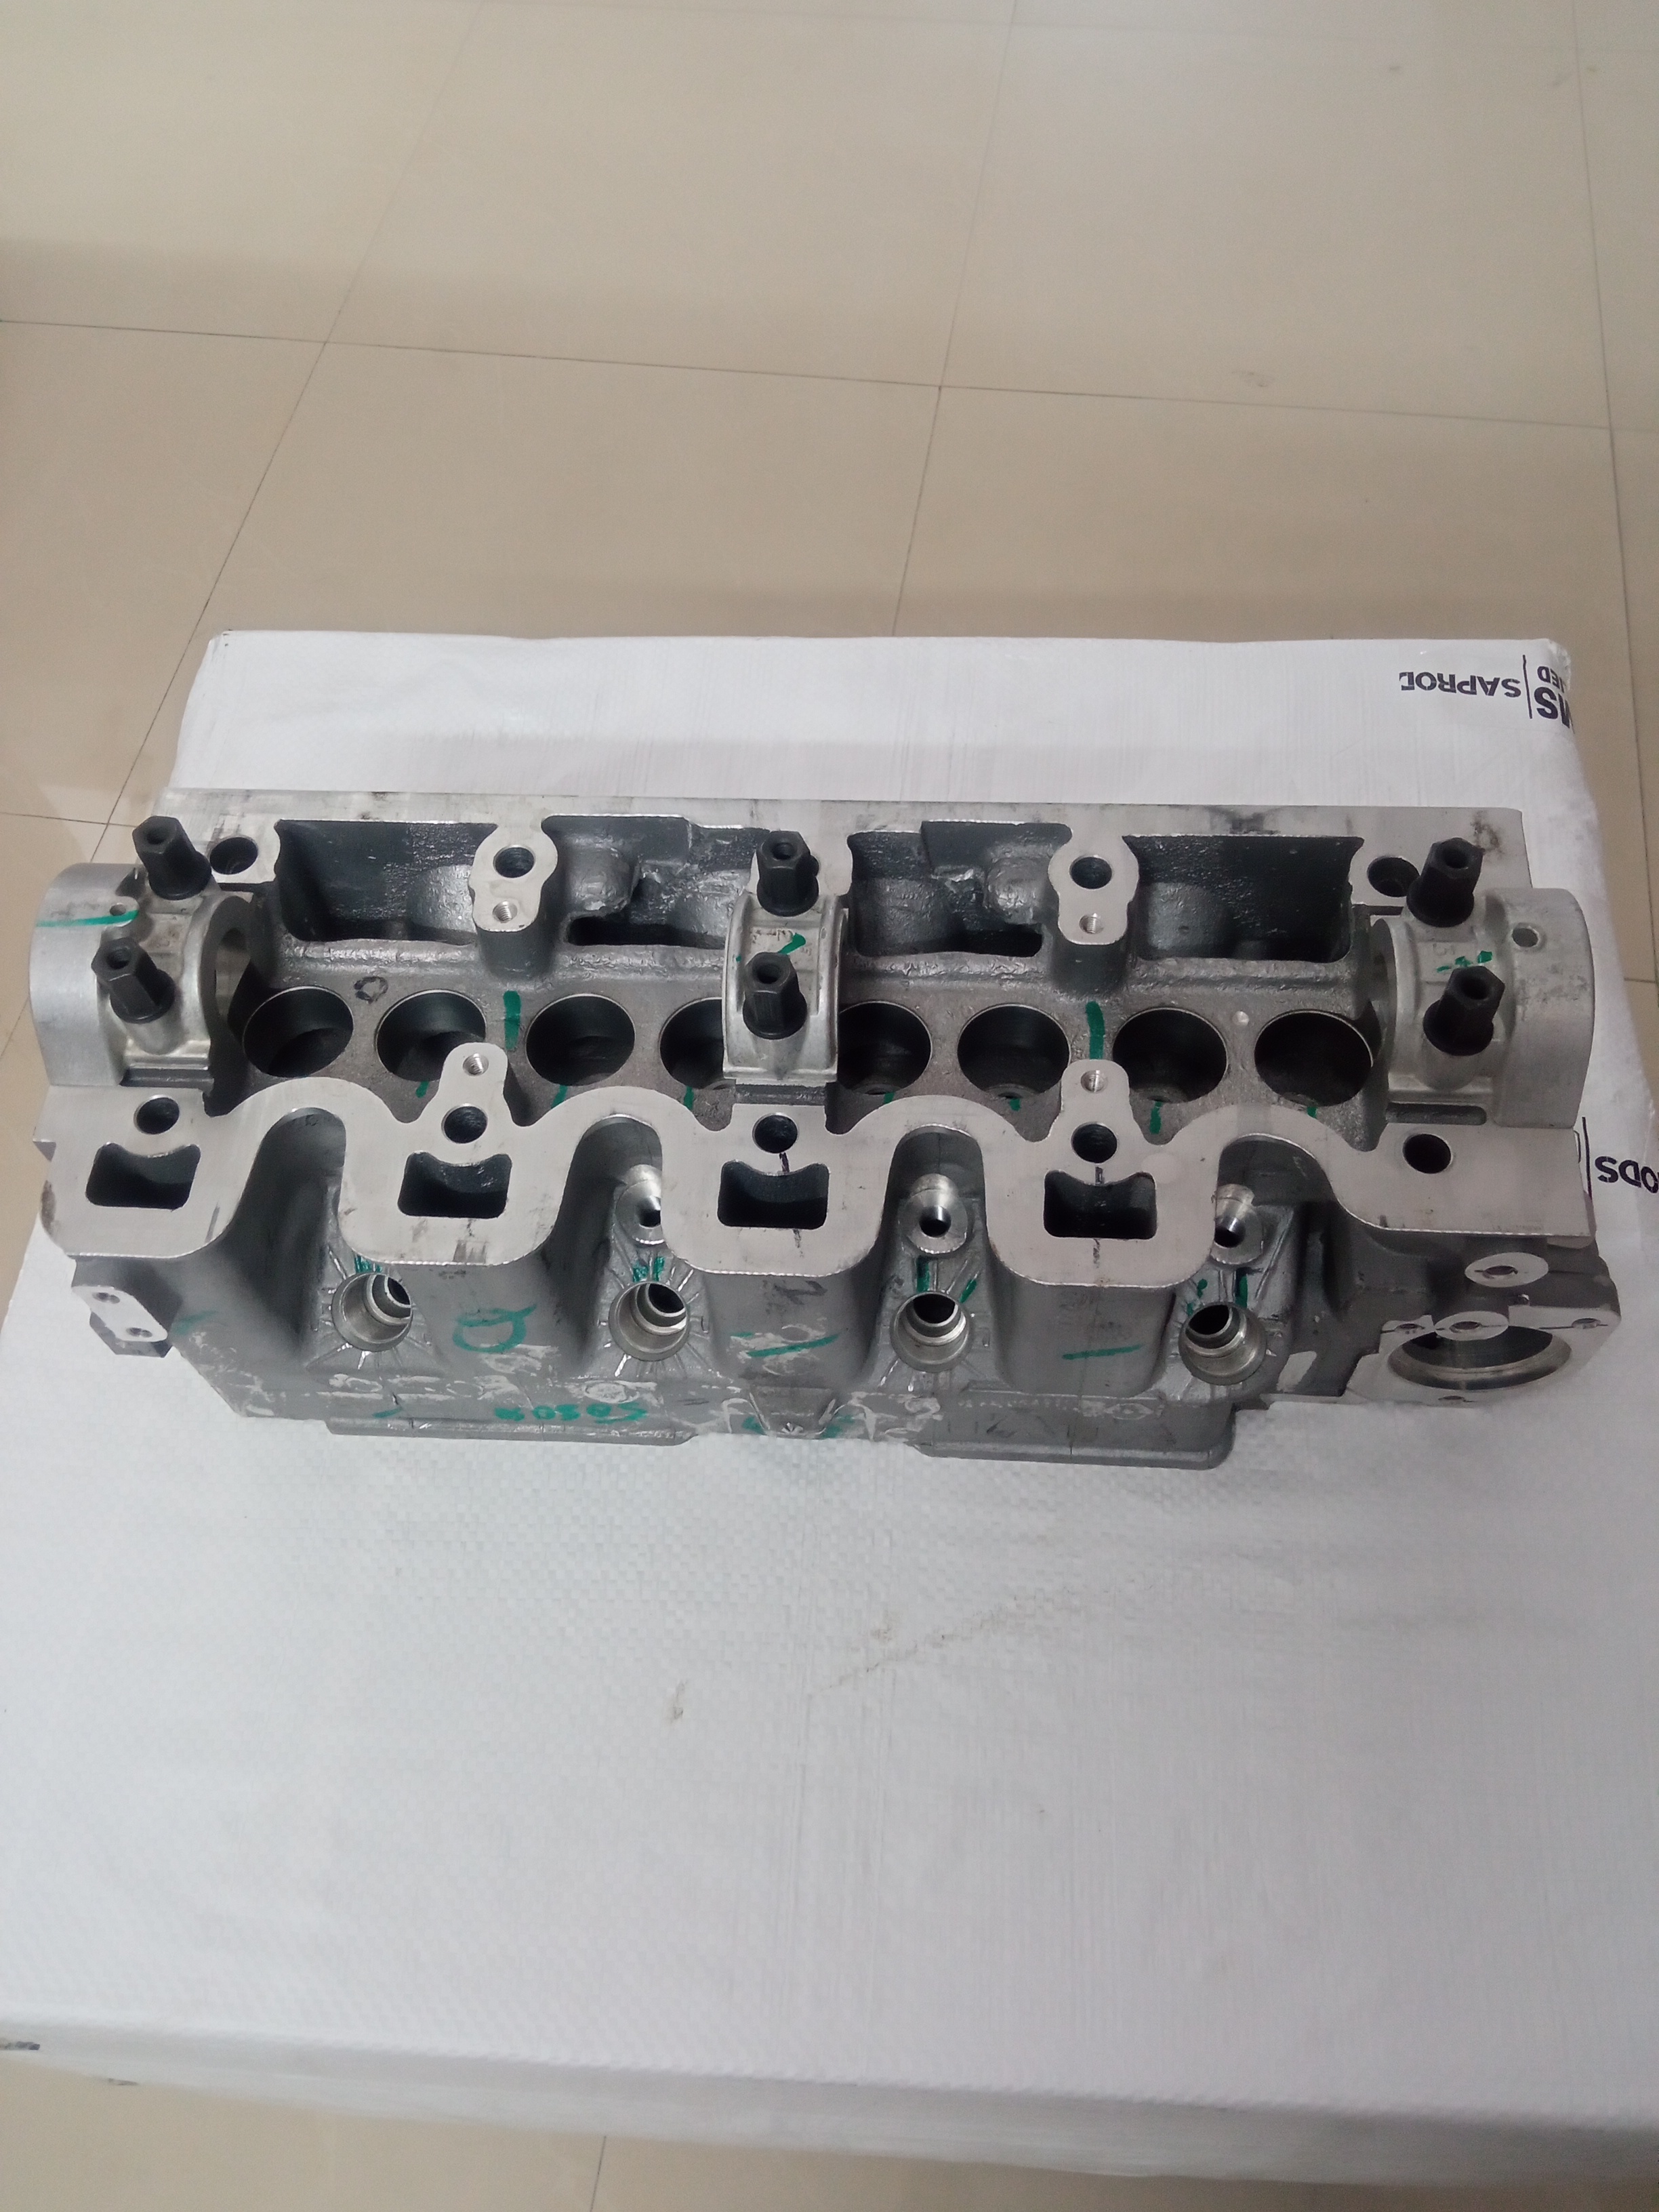 TATA INDICA ASSY.CYLINDER HEAD WITHOUT VALVES (TCIC) 279001150140 STOCKID 2202